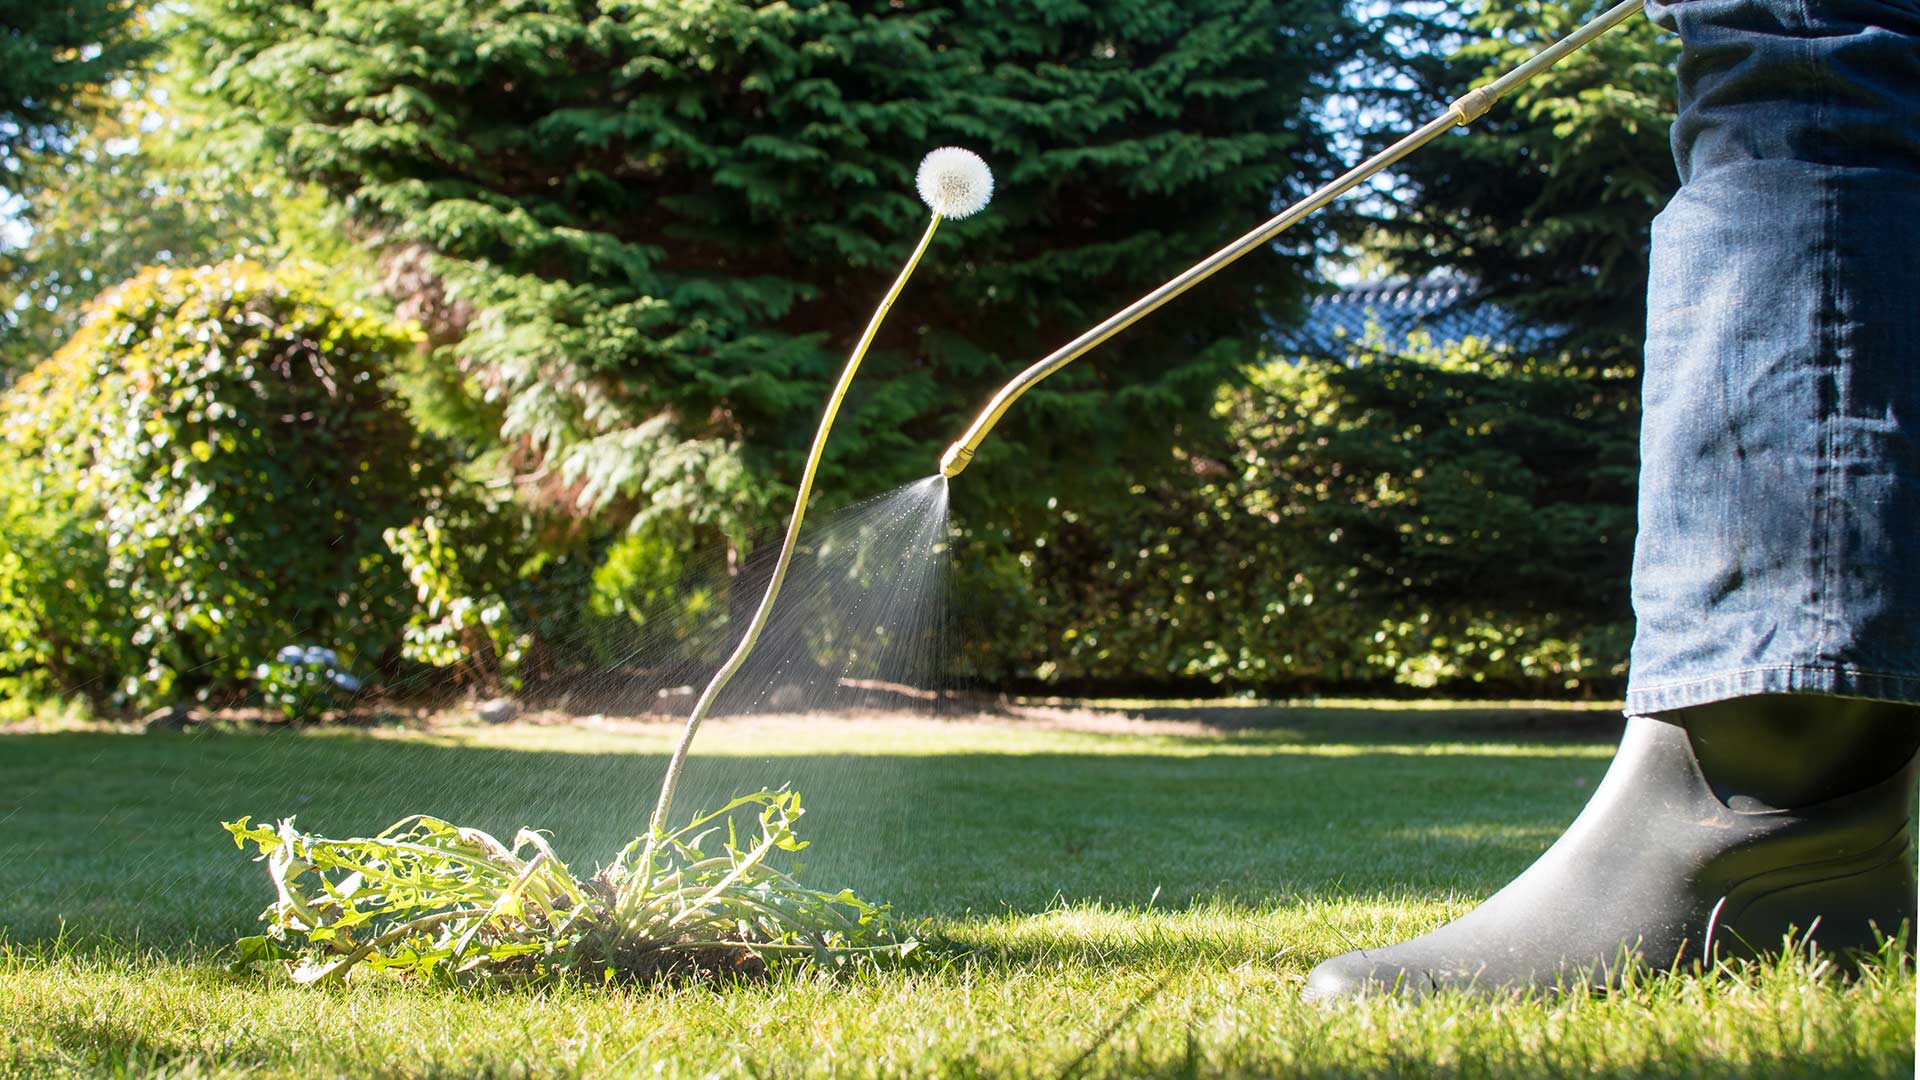 Do Lawns in Texas Need Both Pre-Emergent & Post-Emergent Weed Control?